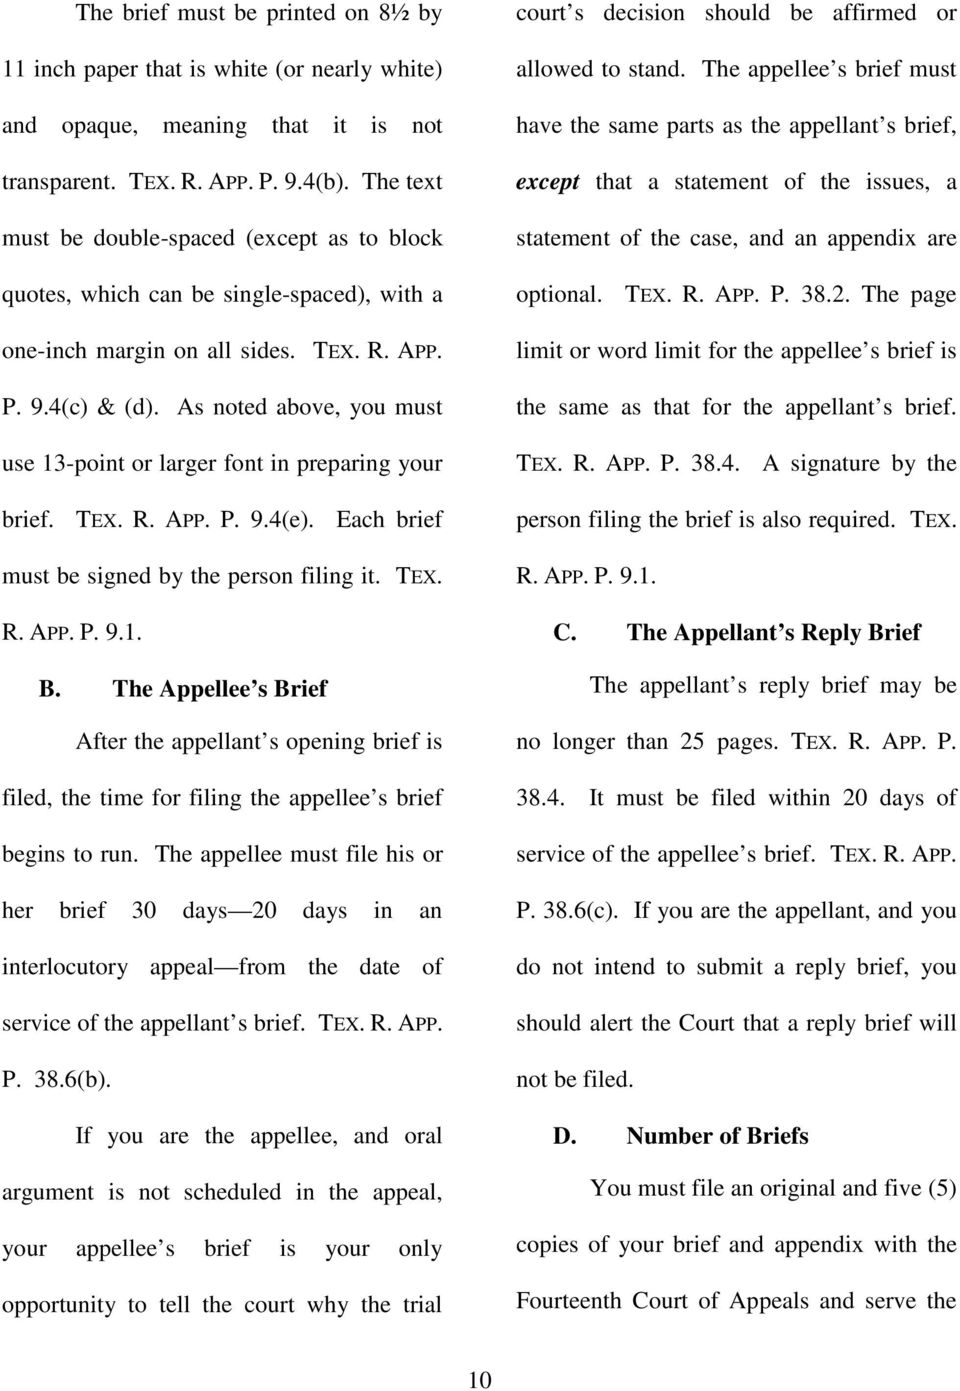 As noted above, you must use 13-point or larger font in preparing your brief. TEX. R. APP. P. 9.4(e). Each brief must be signed by the person filing it. TEX. R. APP. P. 9.1. B.